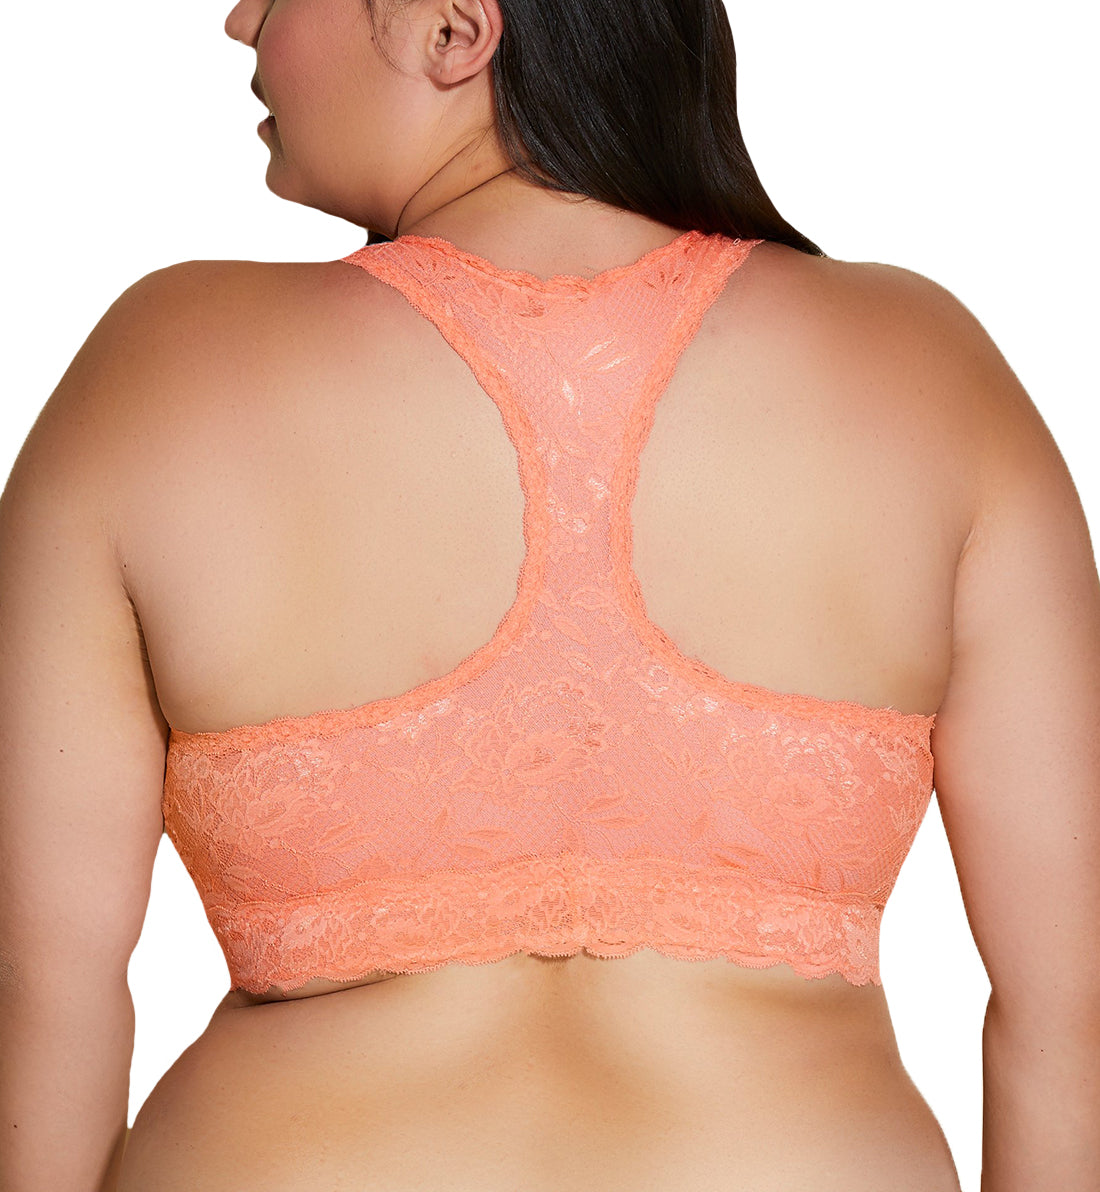 Cosabella Never Say Never Ultra CURVY Racie Racerback Bralette (NEVER1353),XS,Coral Breeze - Coral Breeze,XS